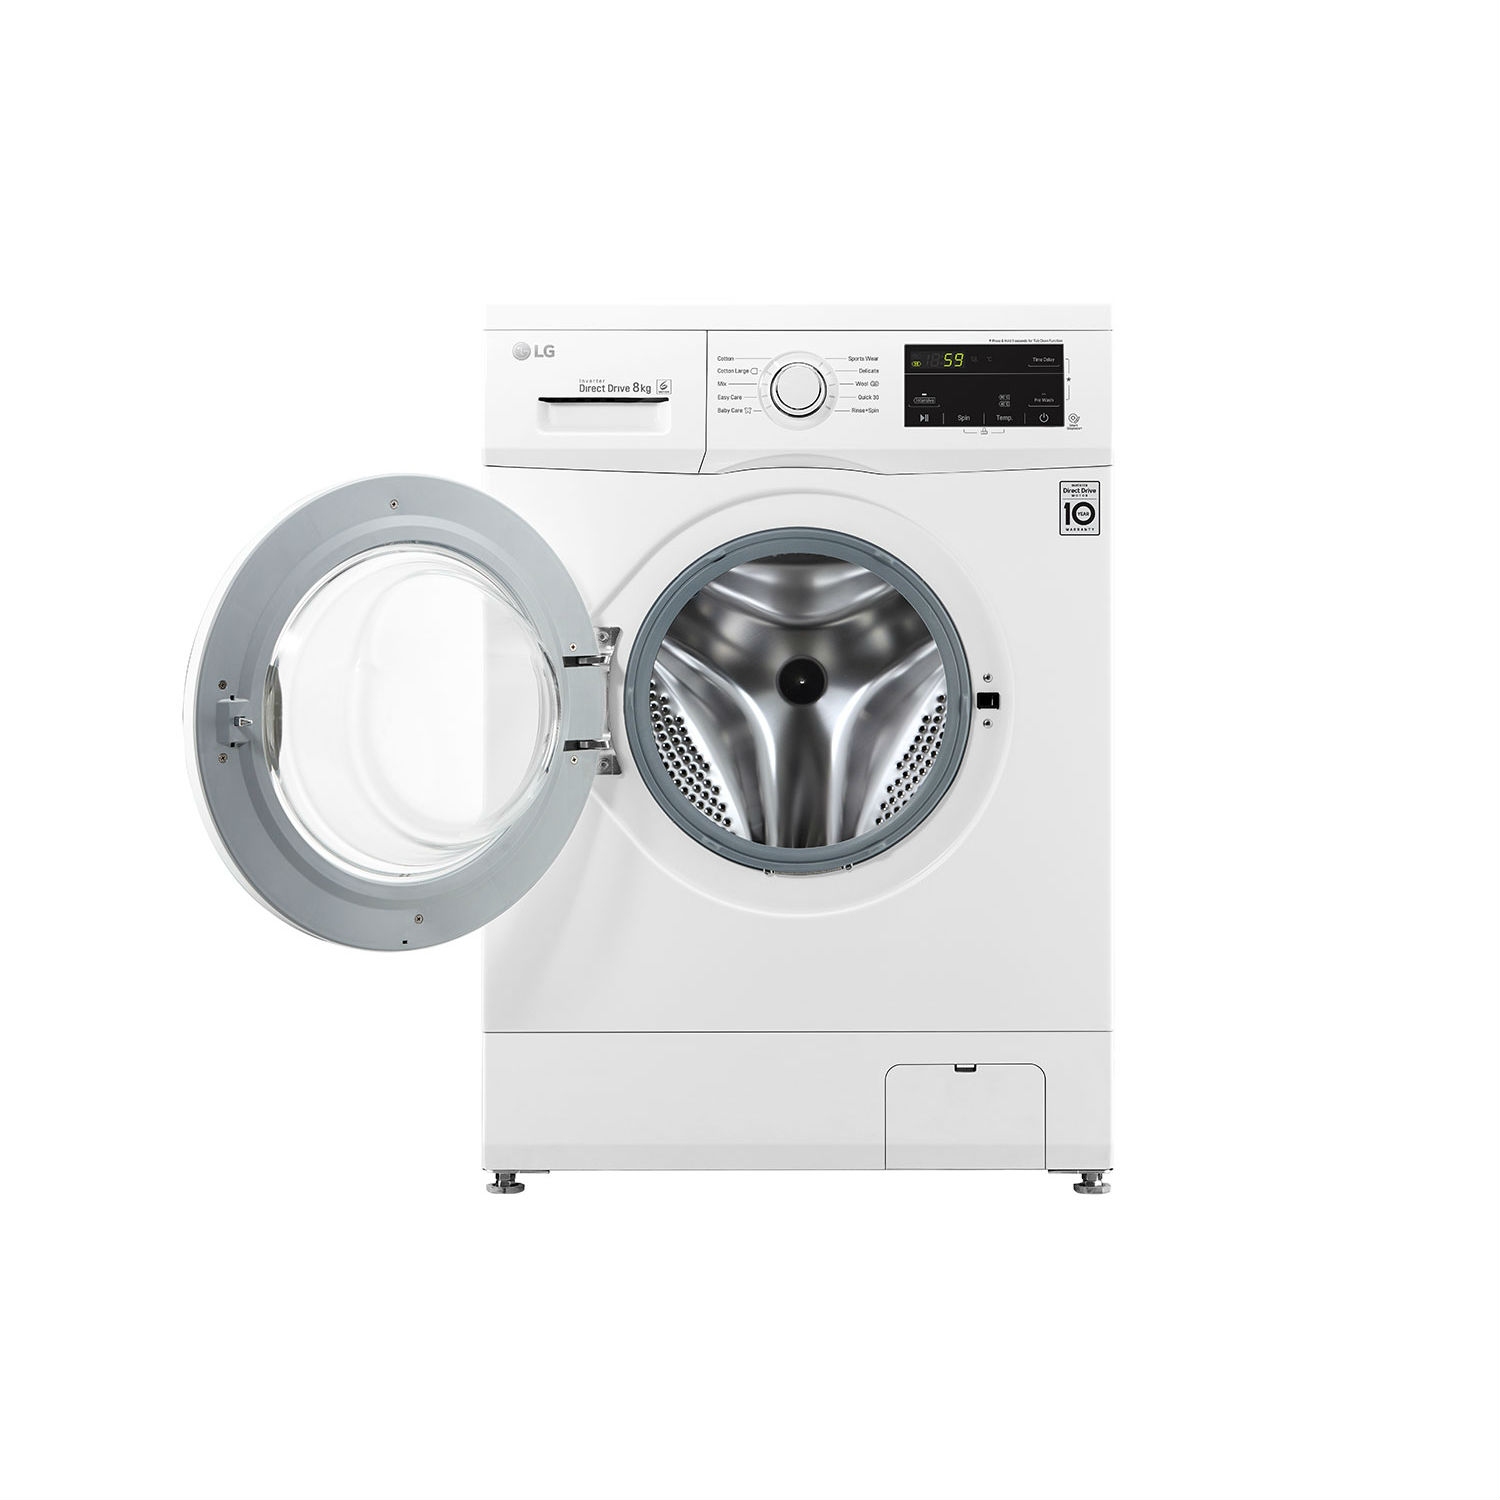 LG ELECTRONICS 8 kg 1400 Inverter Direct Drive Washing Machine - WHITE - A+++-30% Energy Rated - 3